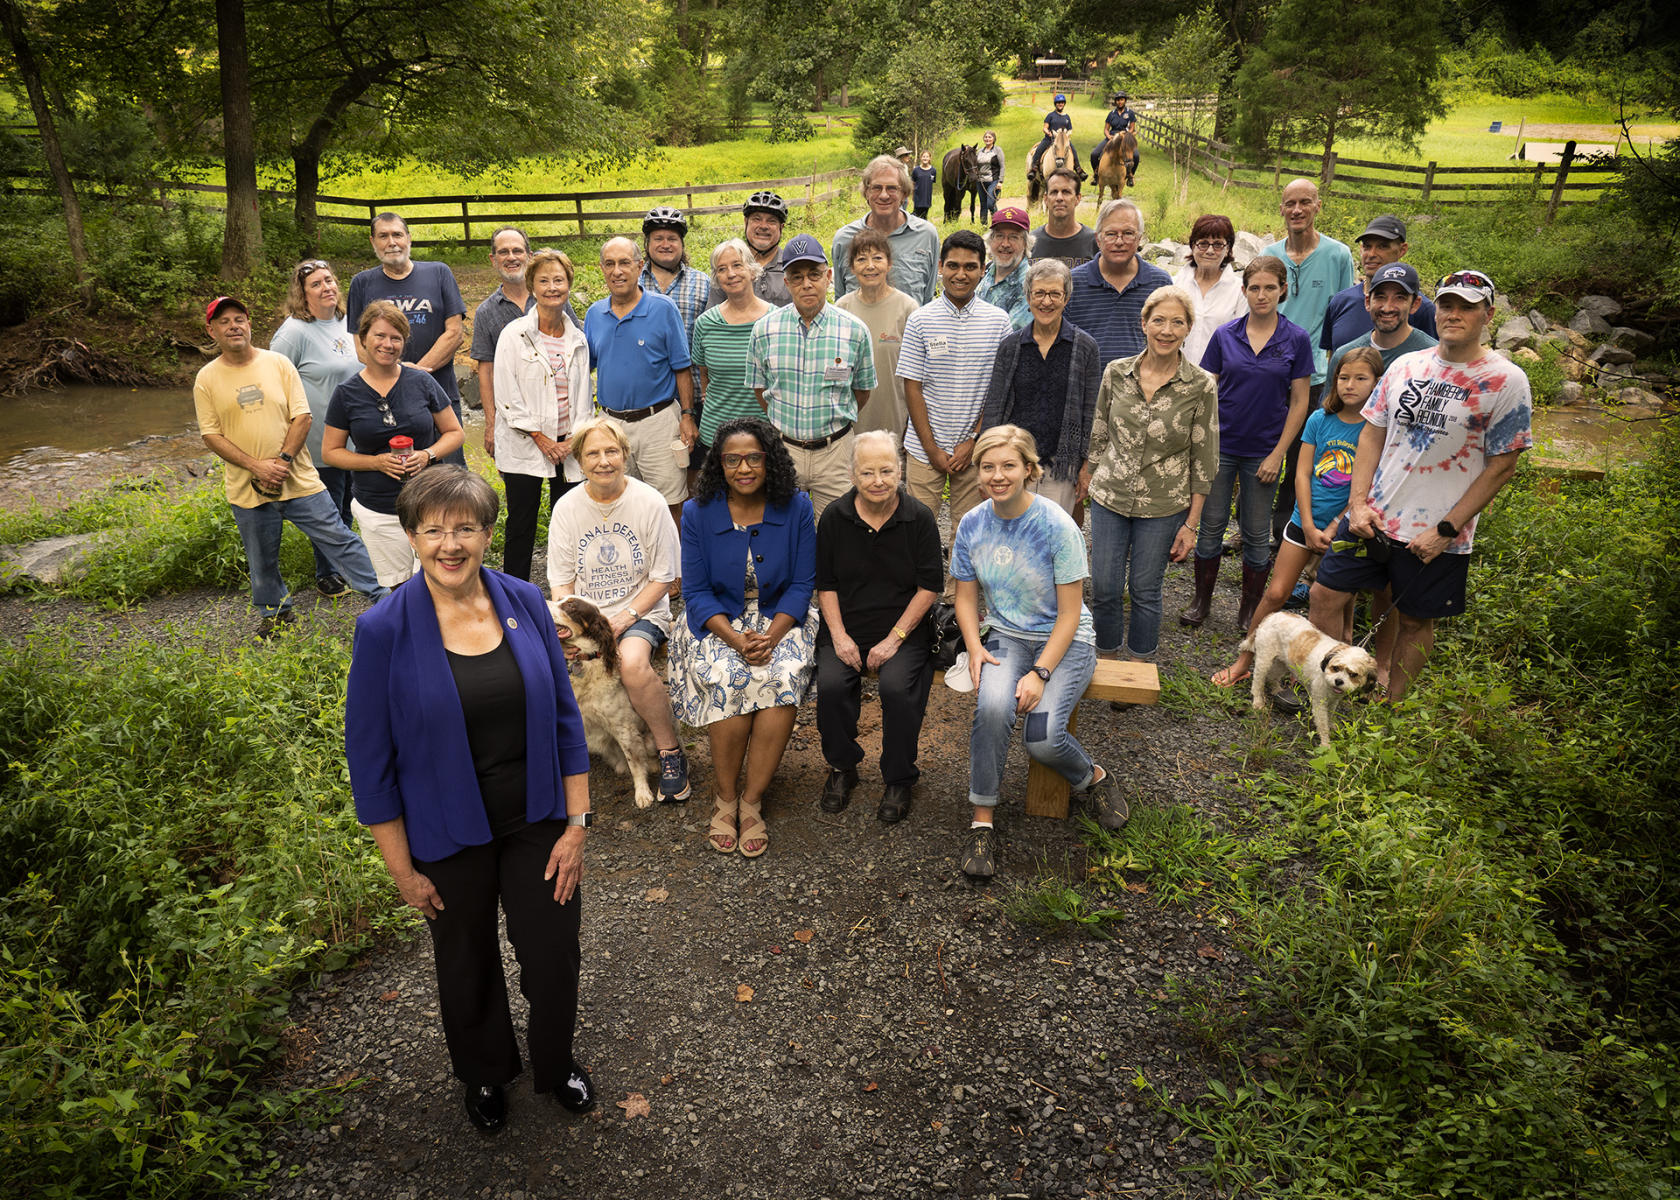 Kathy Smith and her supporters assembled in the wooded recreation area that lost a bridge that connected local communities. Without the bridge they were cut off and she was there to show her support for the repair of the bridge.